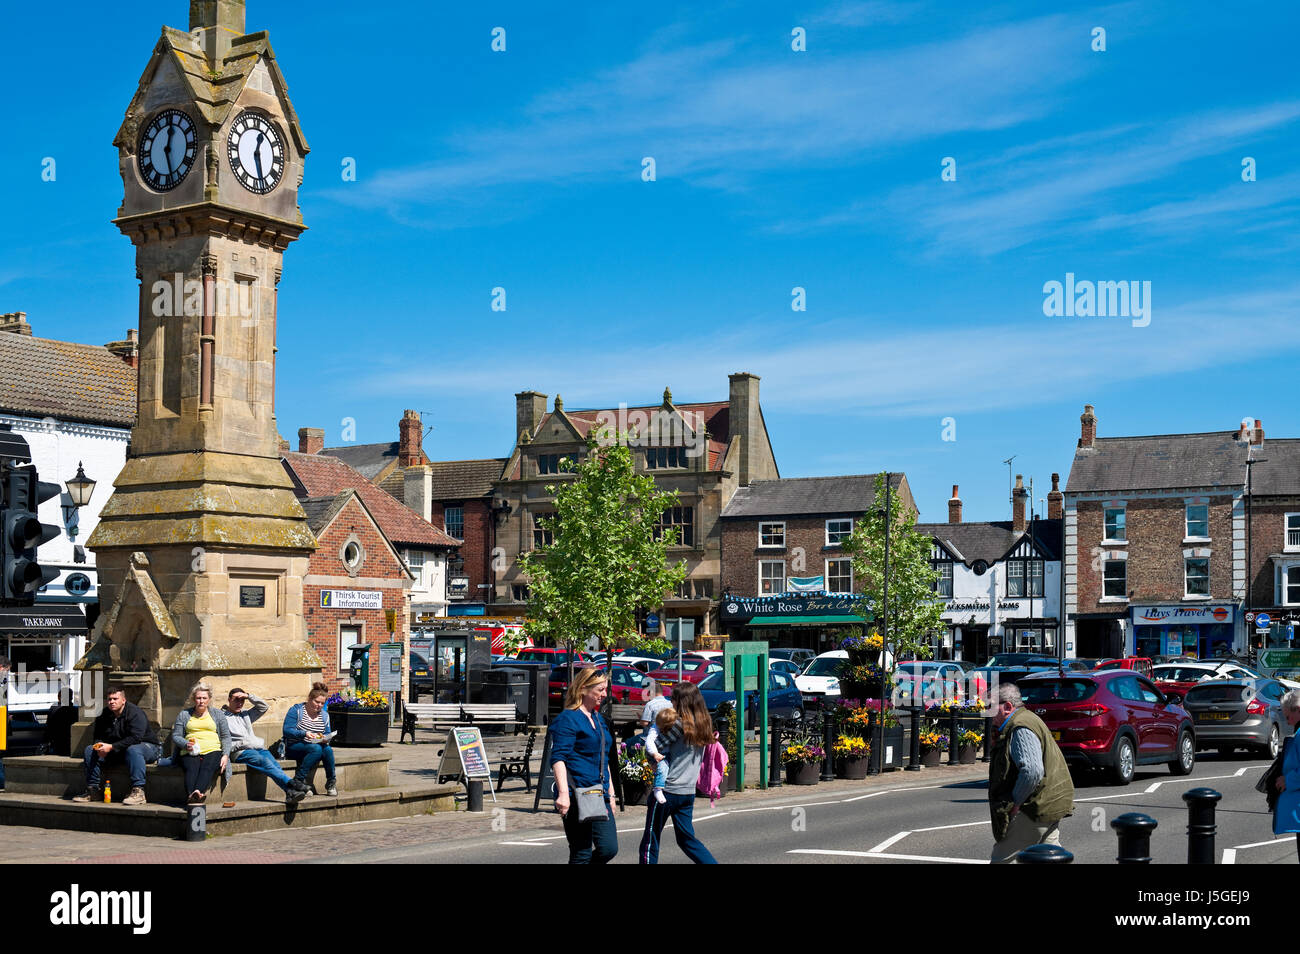 Market Place and Clock Tower people shopping shoppers in spring Thirsk town centre North Yorkshire England UK United Kingdom GB Great Britain Stock Photo